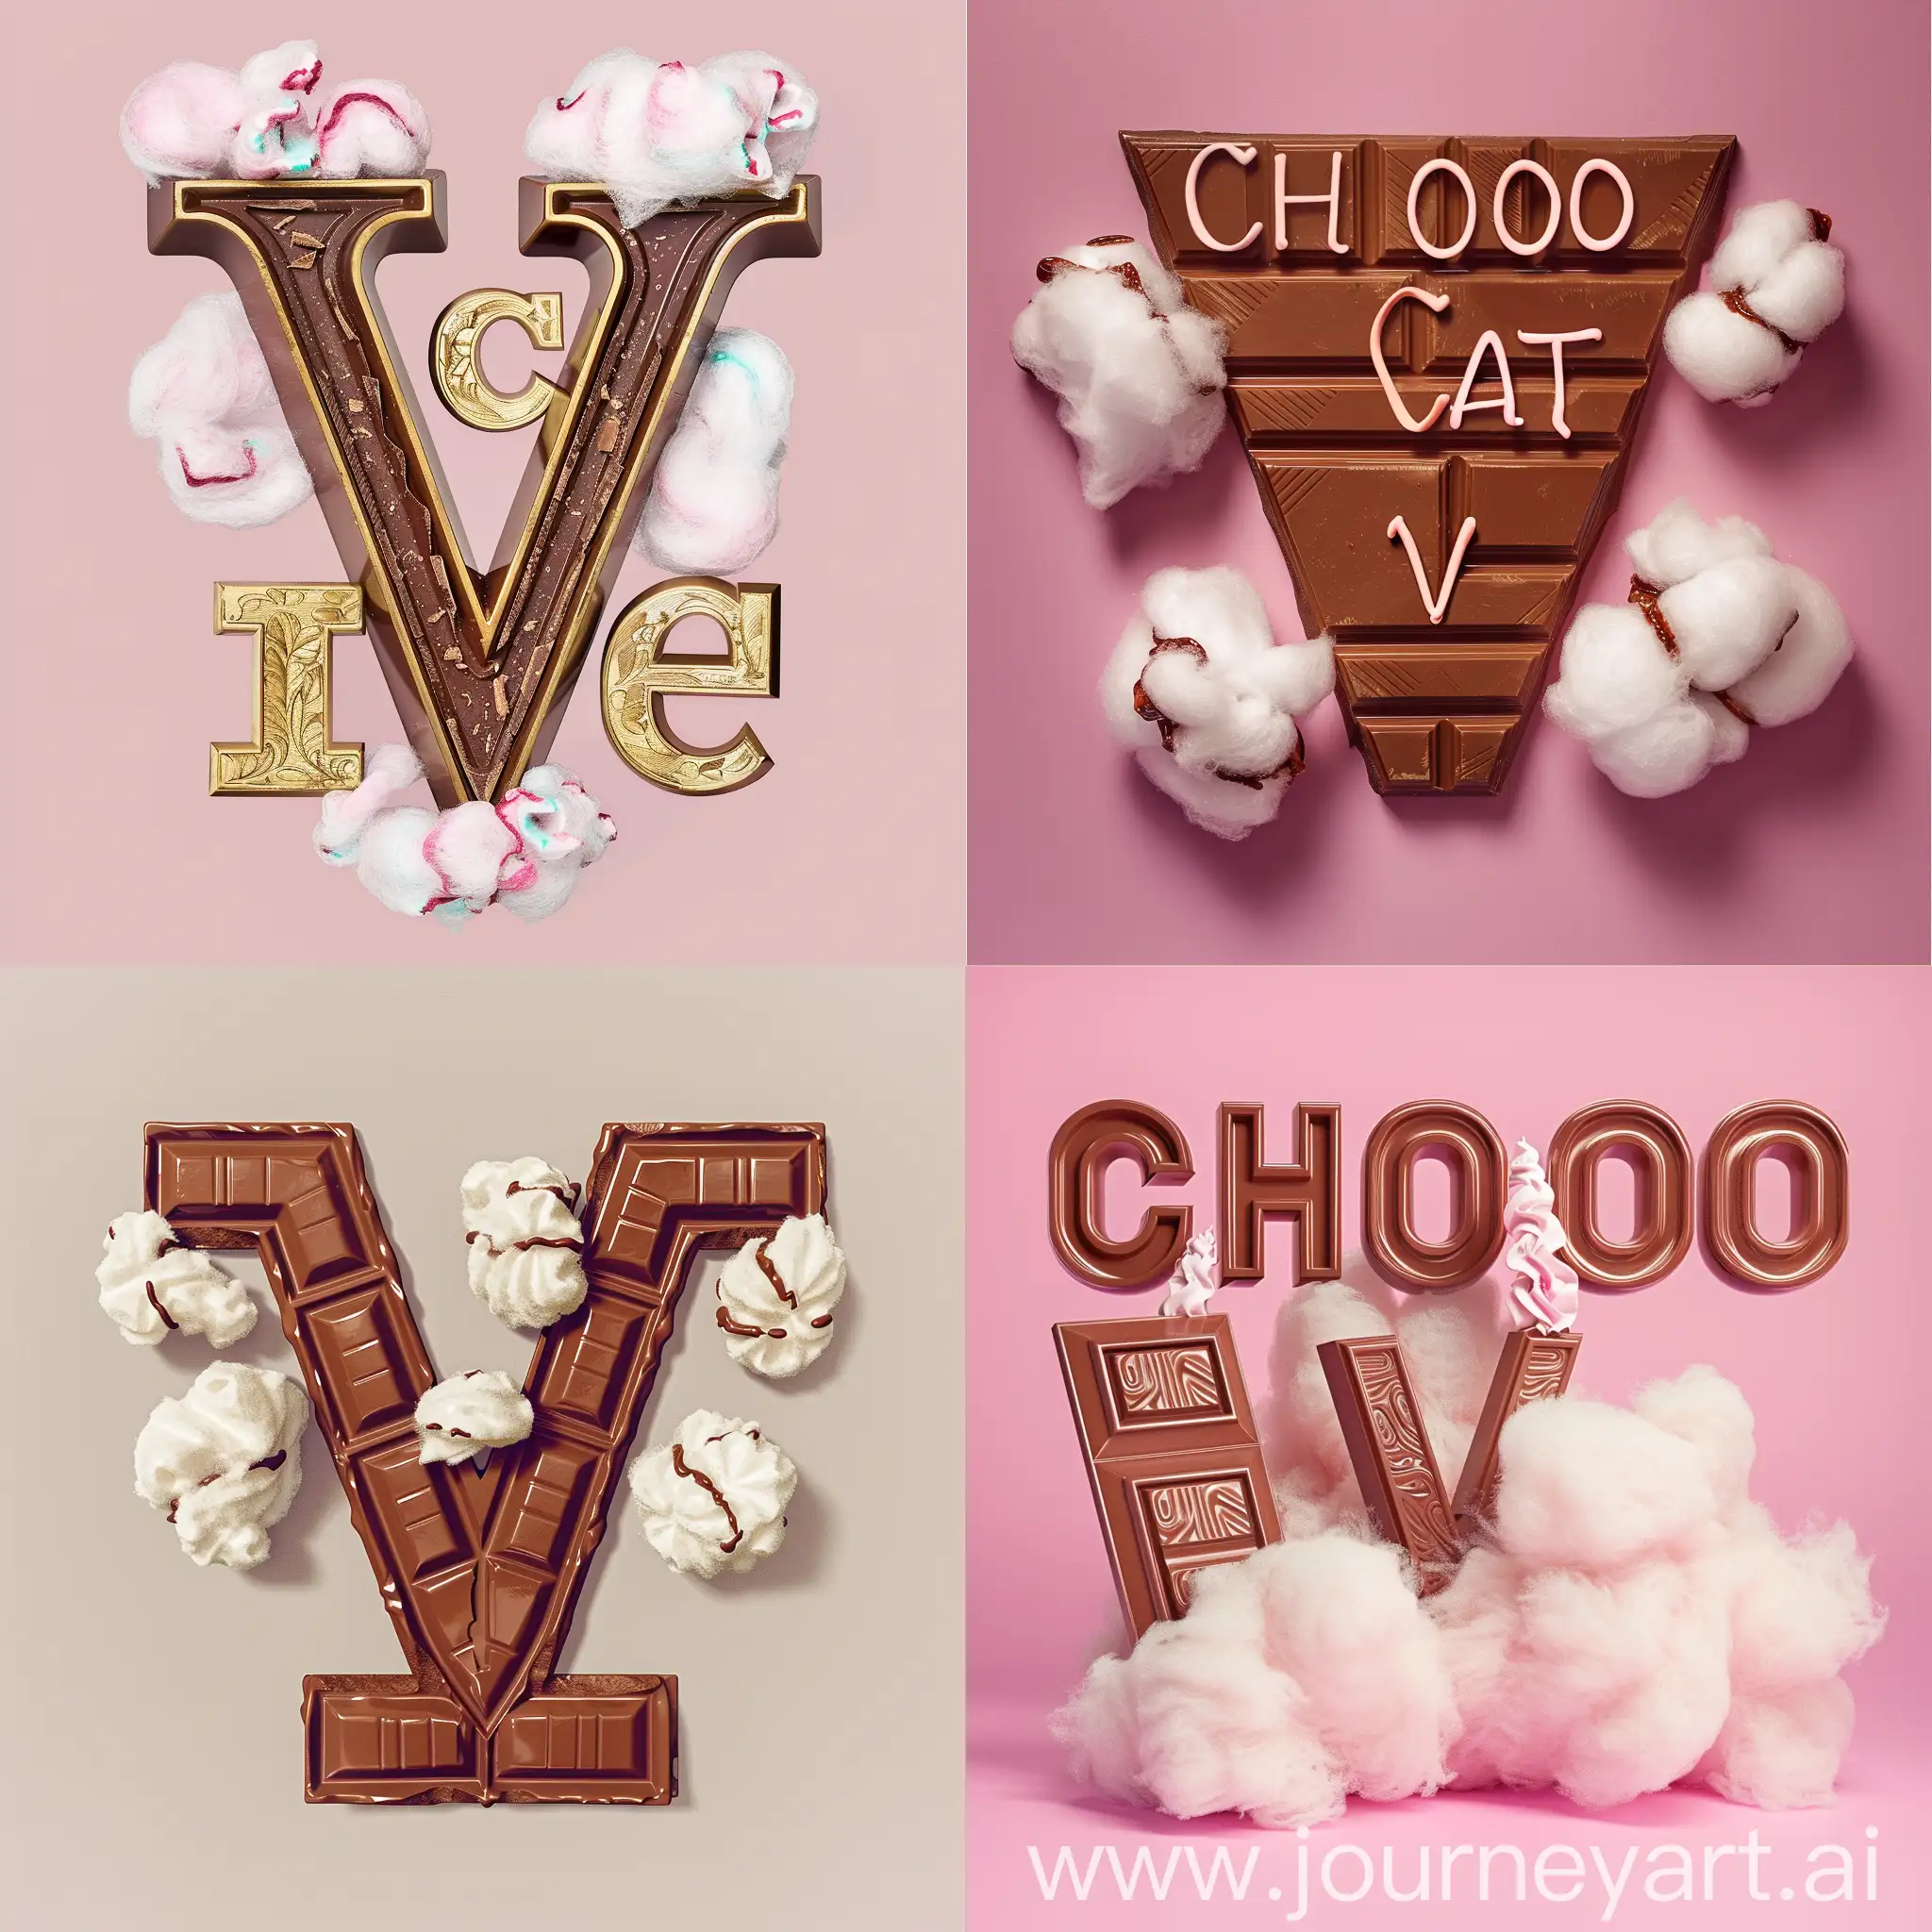 Chocolate-and-Cotton-Candy-ChocoVat-Sign